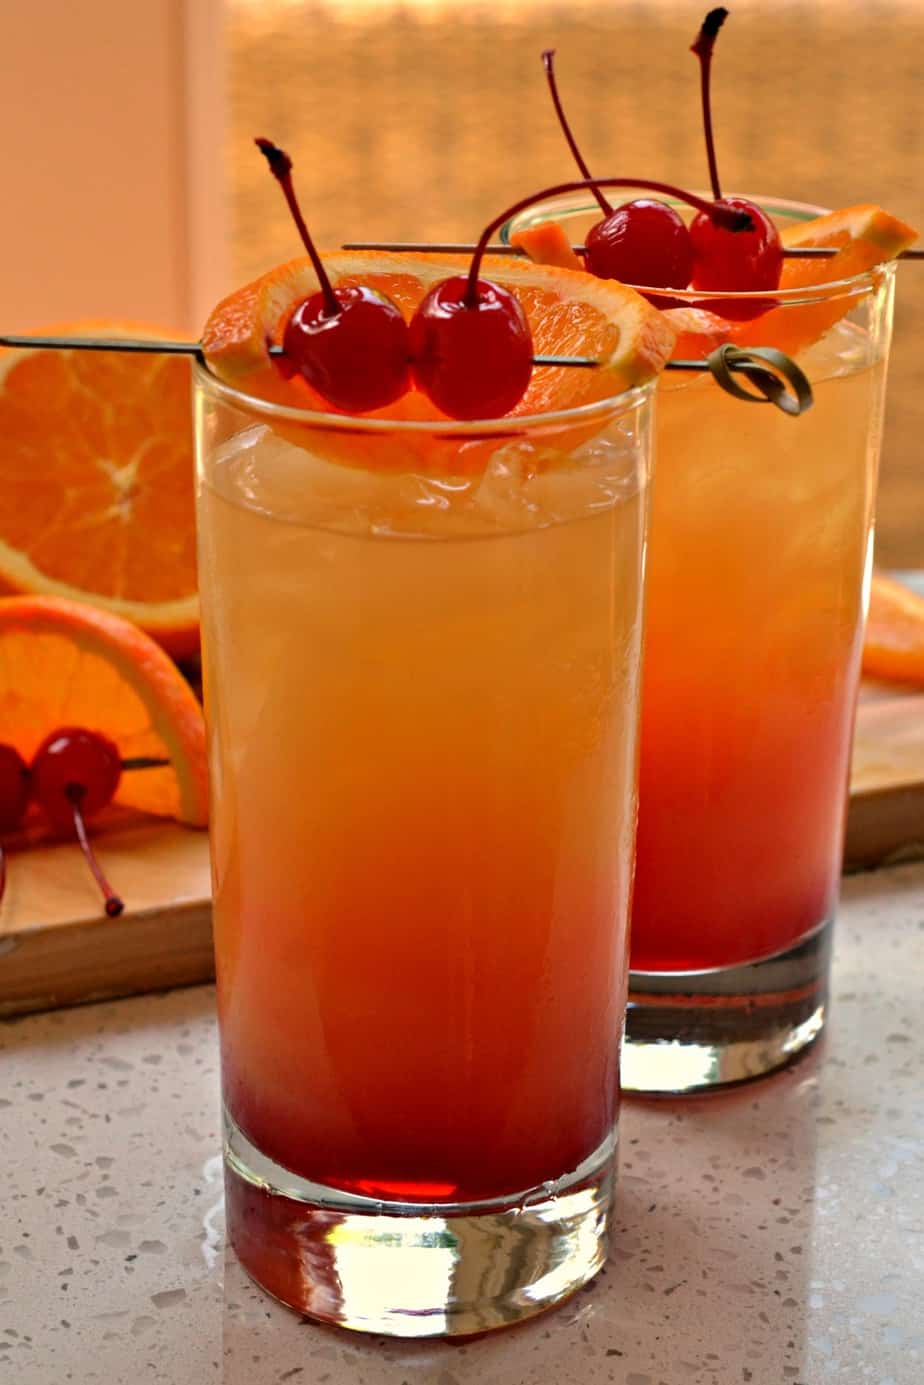 Tequila Sunrise An Easy Three Ingredient Refreshing Cocktail,Wheat Beer With Orange